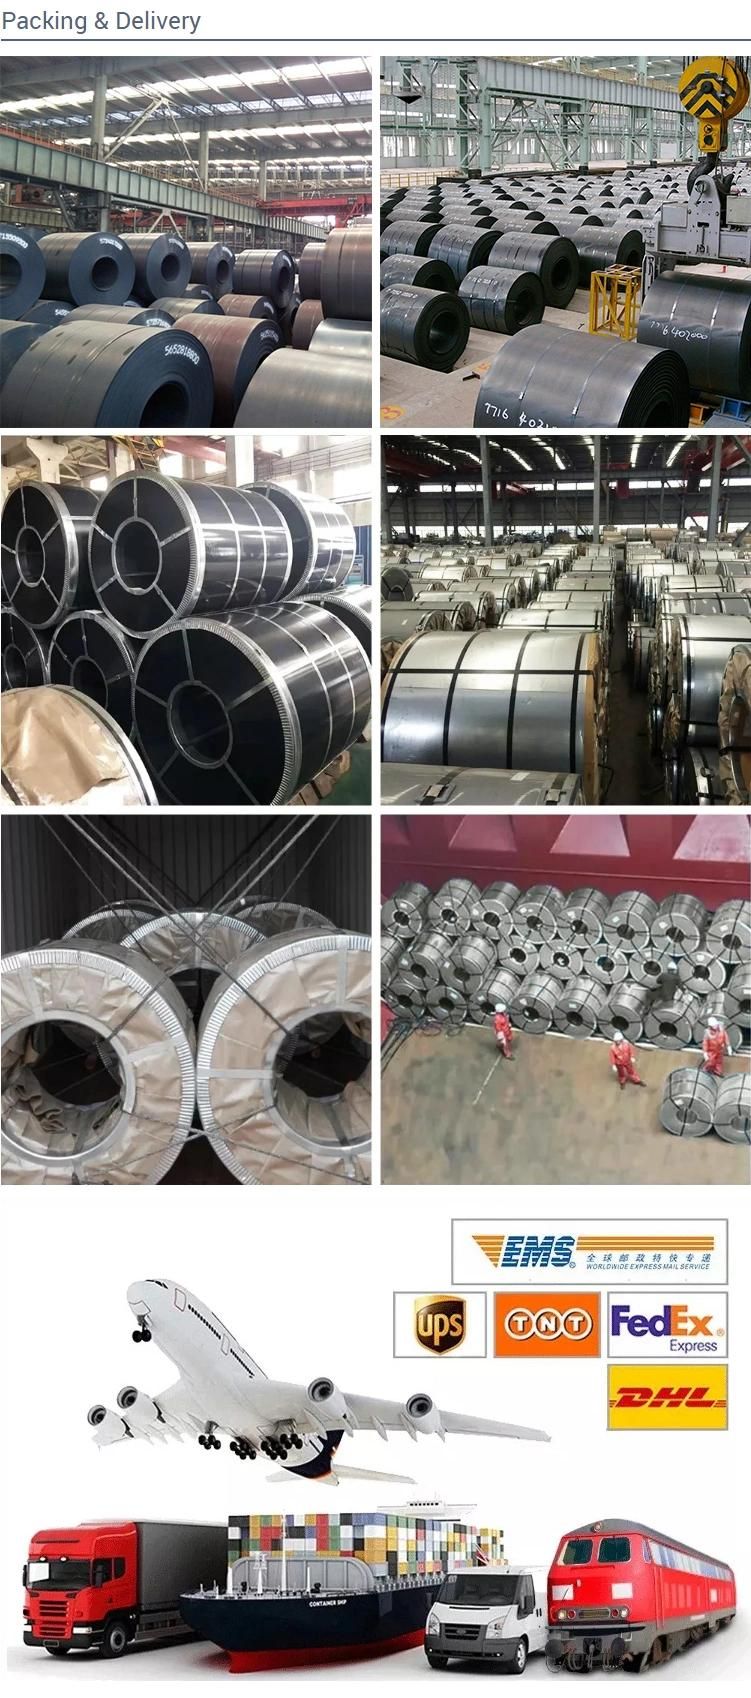 4130, A204 Rolled Steel Cold Rolled Mild Steel Sheet Coils Hot Rolled Coil